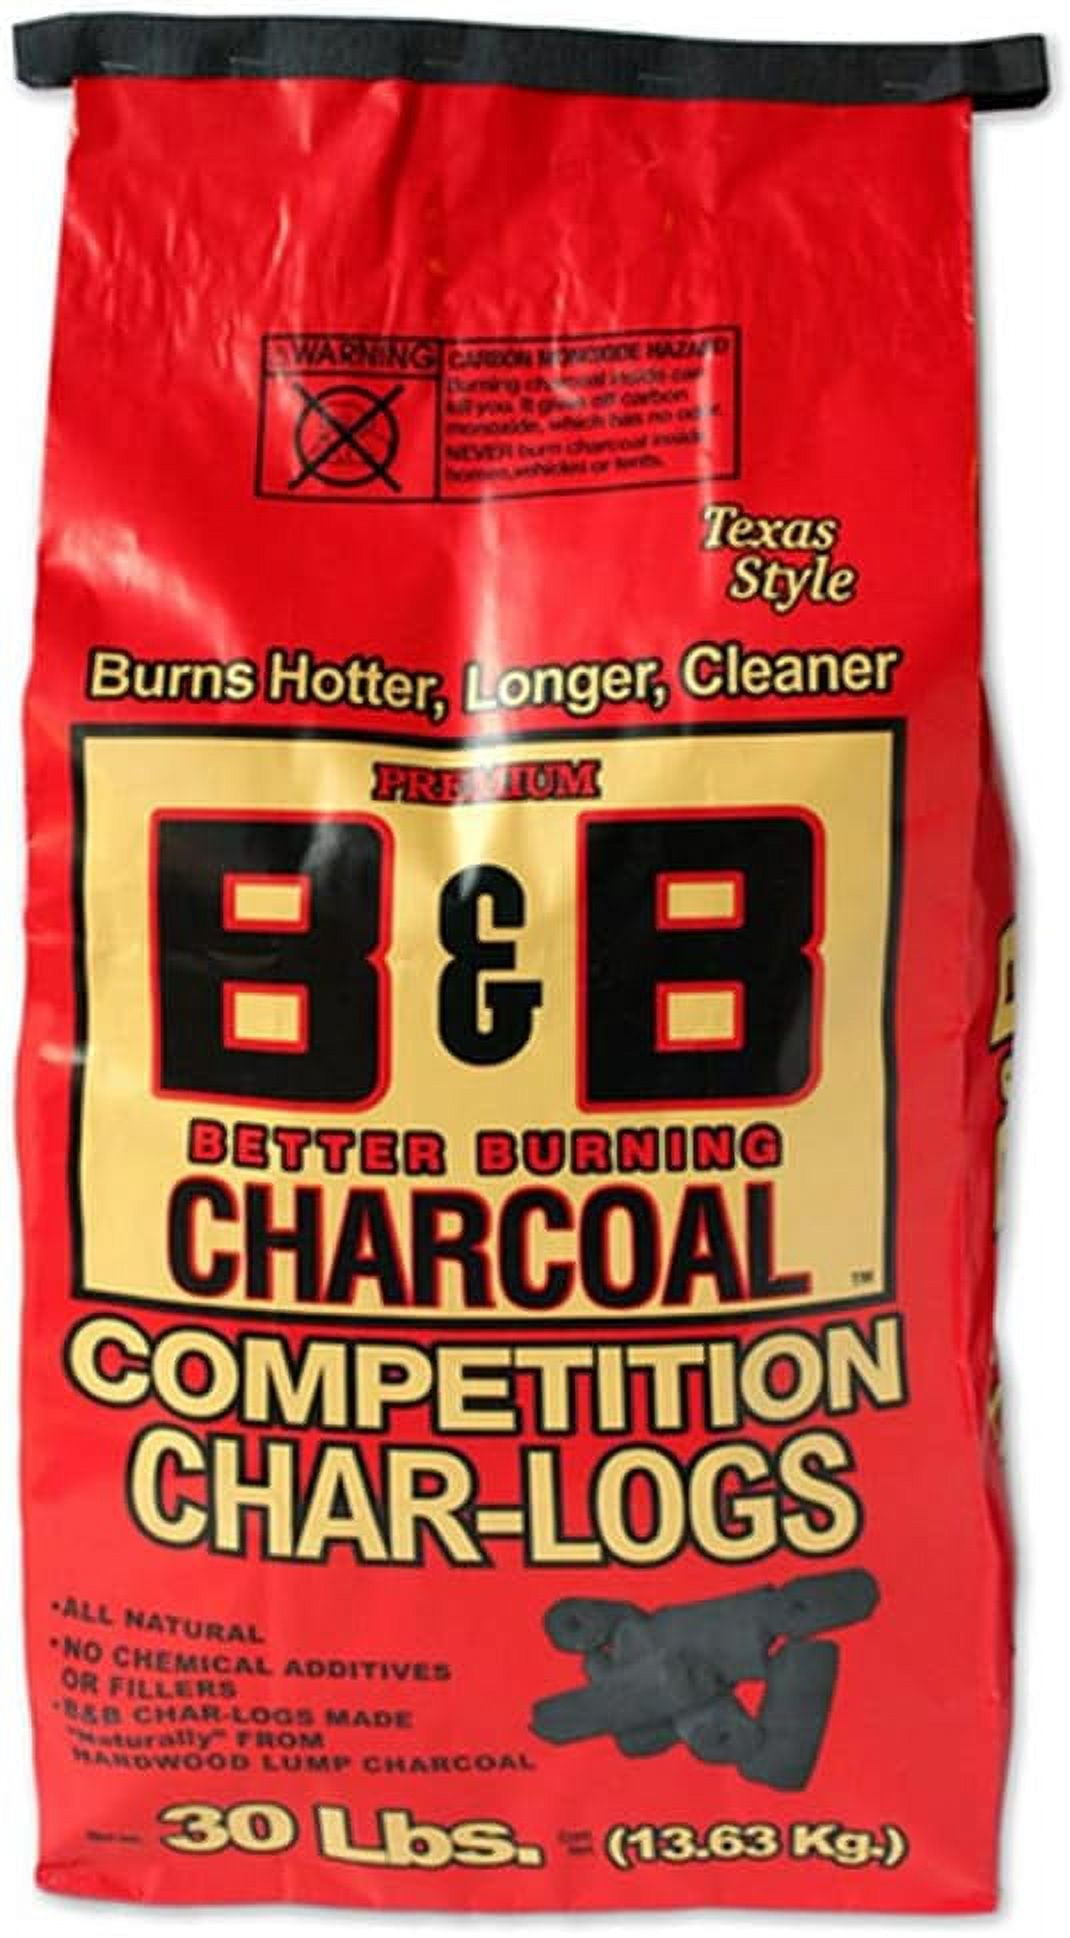 30 Competition Charcoal Briquettes, Charcoal B&B - Lbs of 00106 Char-logs Set 4